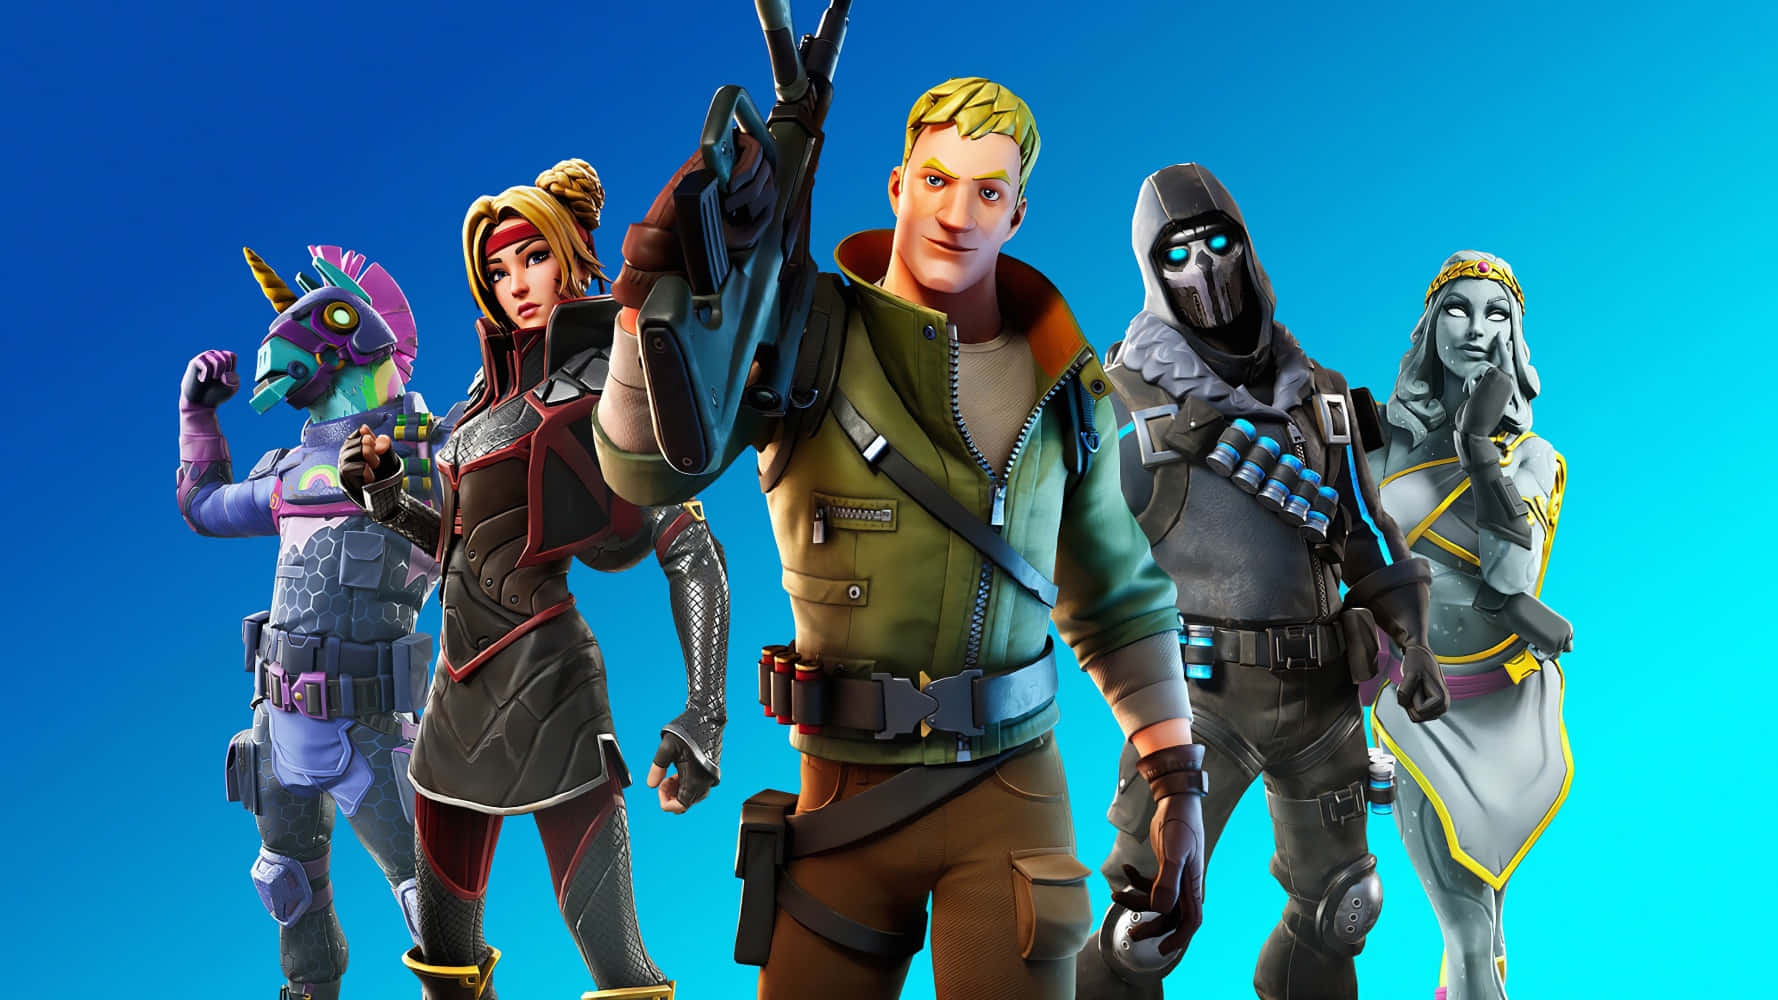 Download Two Fortnite Players in Battle